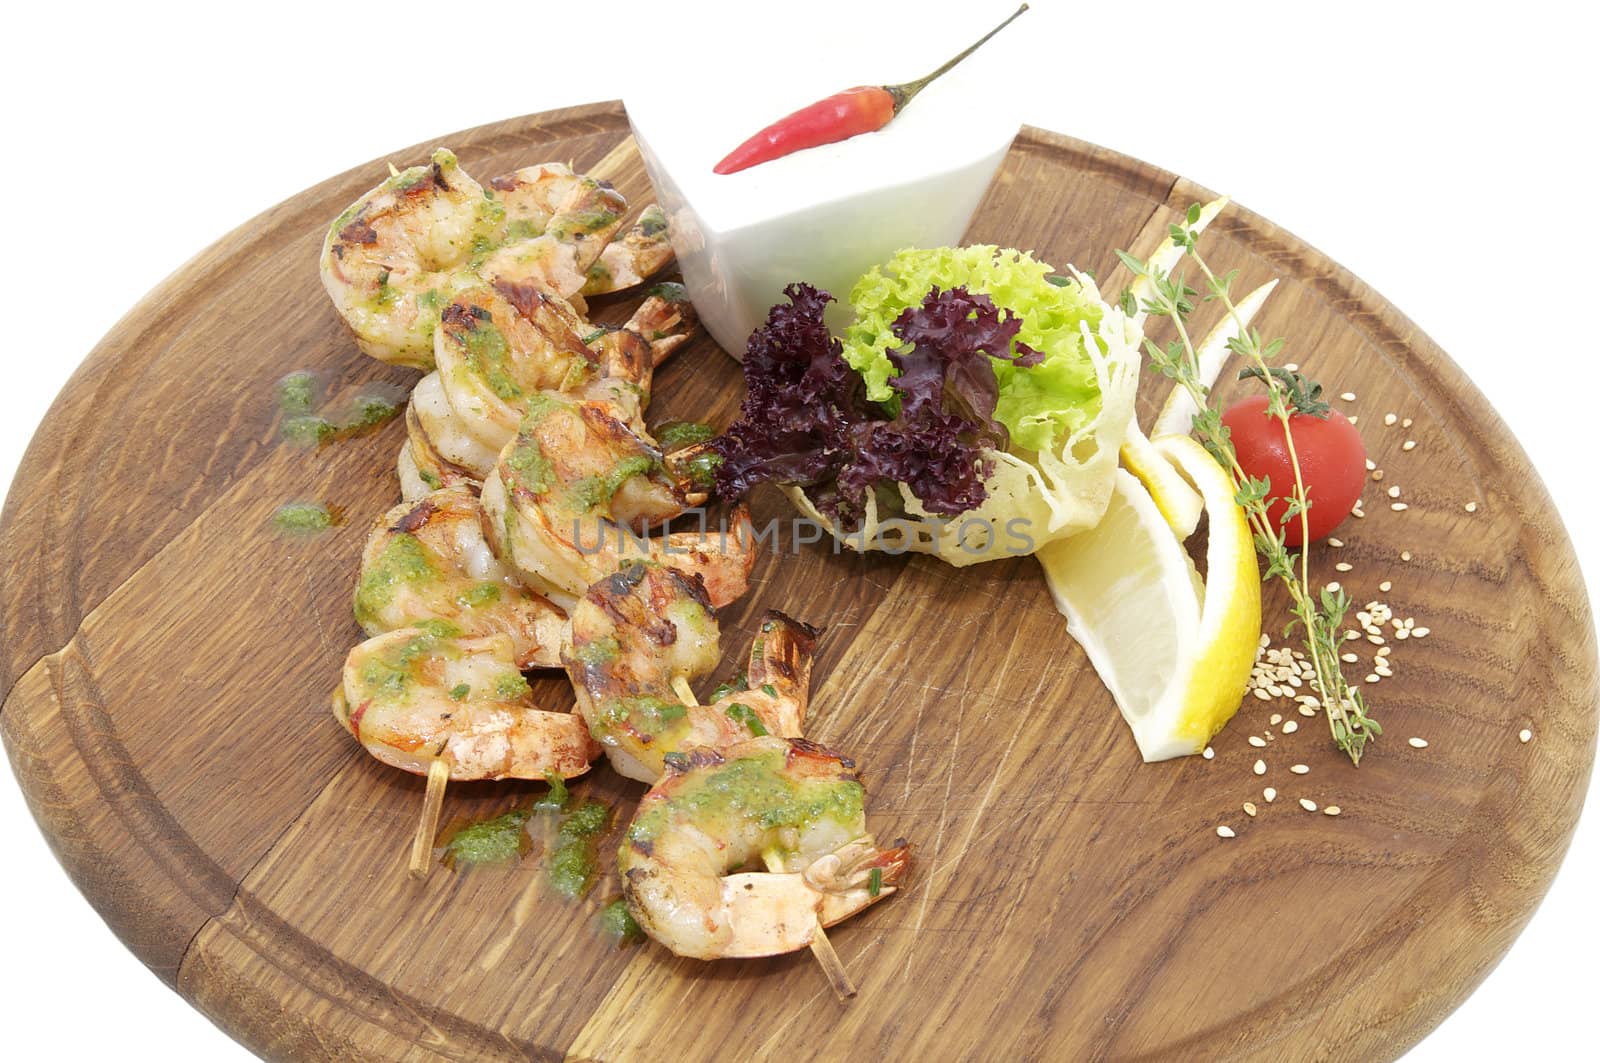 grilled shrimp with a salad on a wooden plate